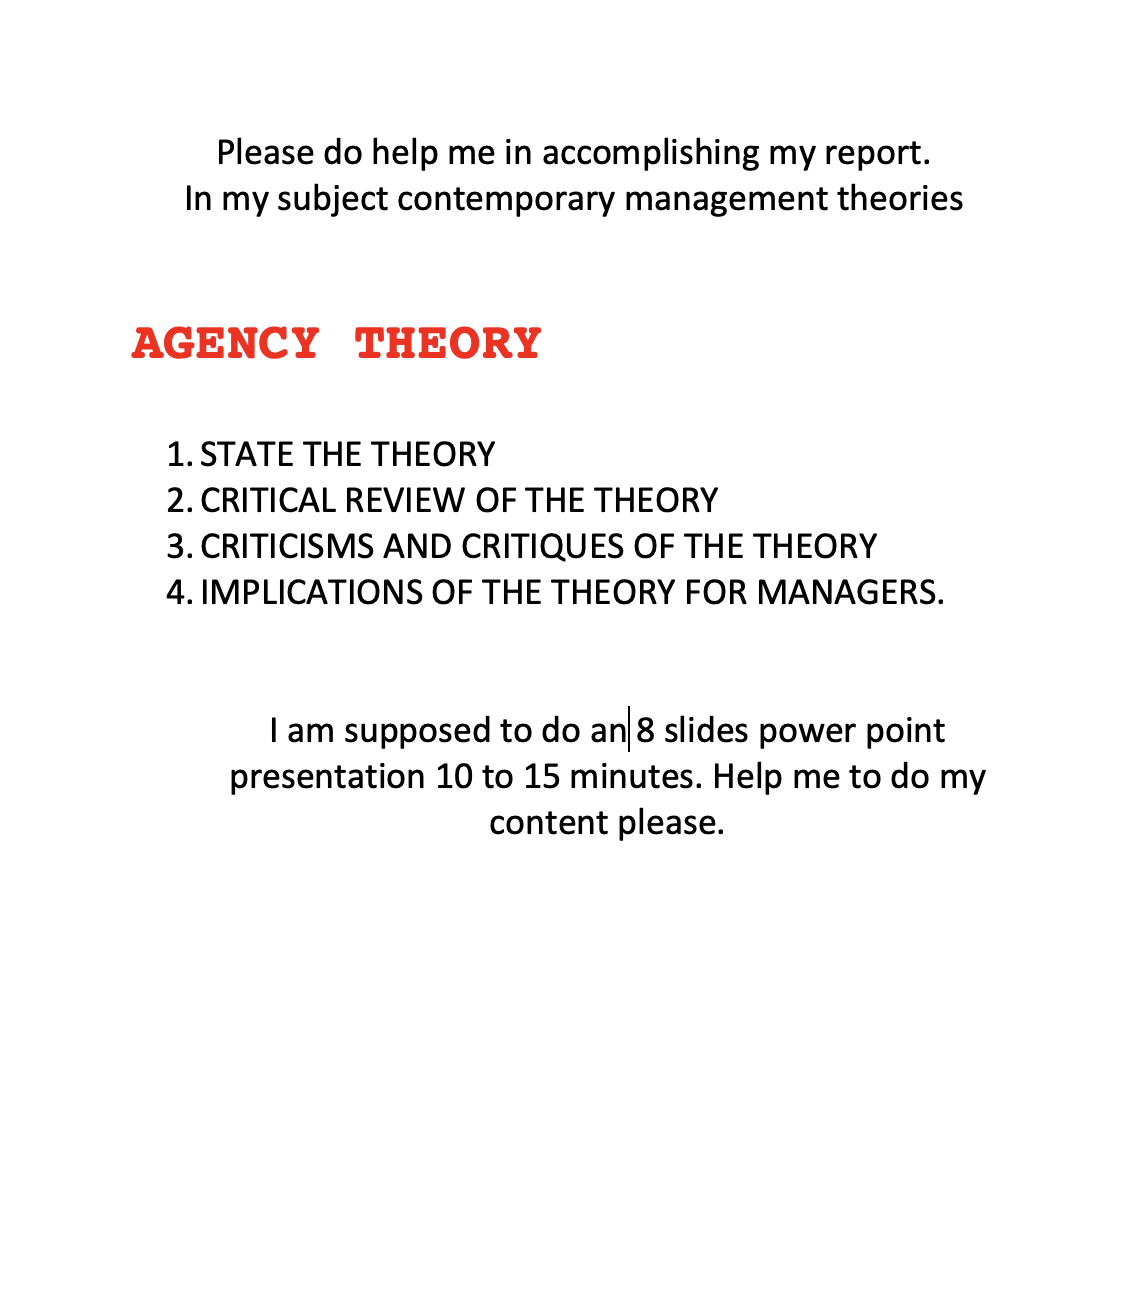 Please do help me in accomplishing my report.
In my subject contemporary management theories
AGENCY THEORY
1. STATE THE THEORY
2. CRITICAL REVIEW OF THE THEORY
3. CRITICISMS AND CRITIQUES OF THE THEORY
4. IMPLICATIONS OF THE THEORY FOR MANAGERS.
I am supposed to do an 8 slides power point
presentation 10 to 15 minutes. Help me to do my
content please.
